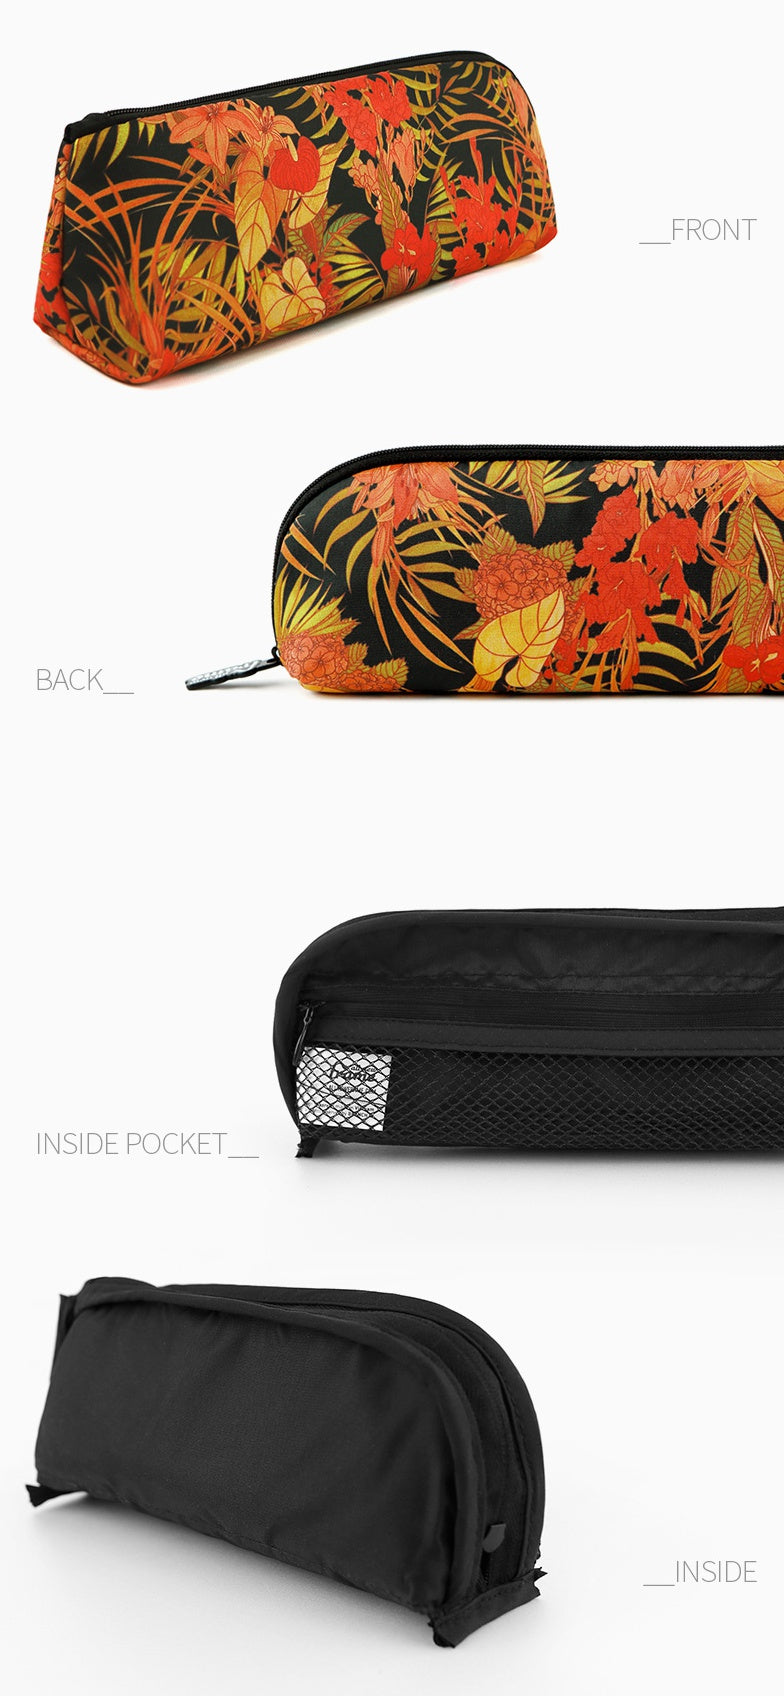 Black Orange Tropical Floral Flower Graphic Pencil Cases Stationery Zipper School 19cm Office organizers cosmetic pouches Gifts Bags Purses